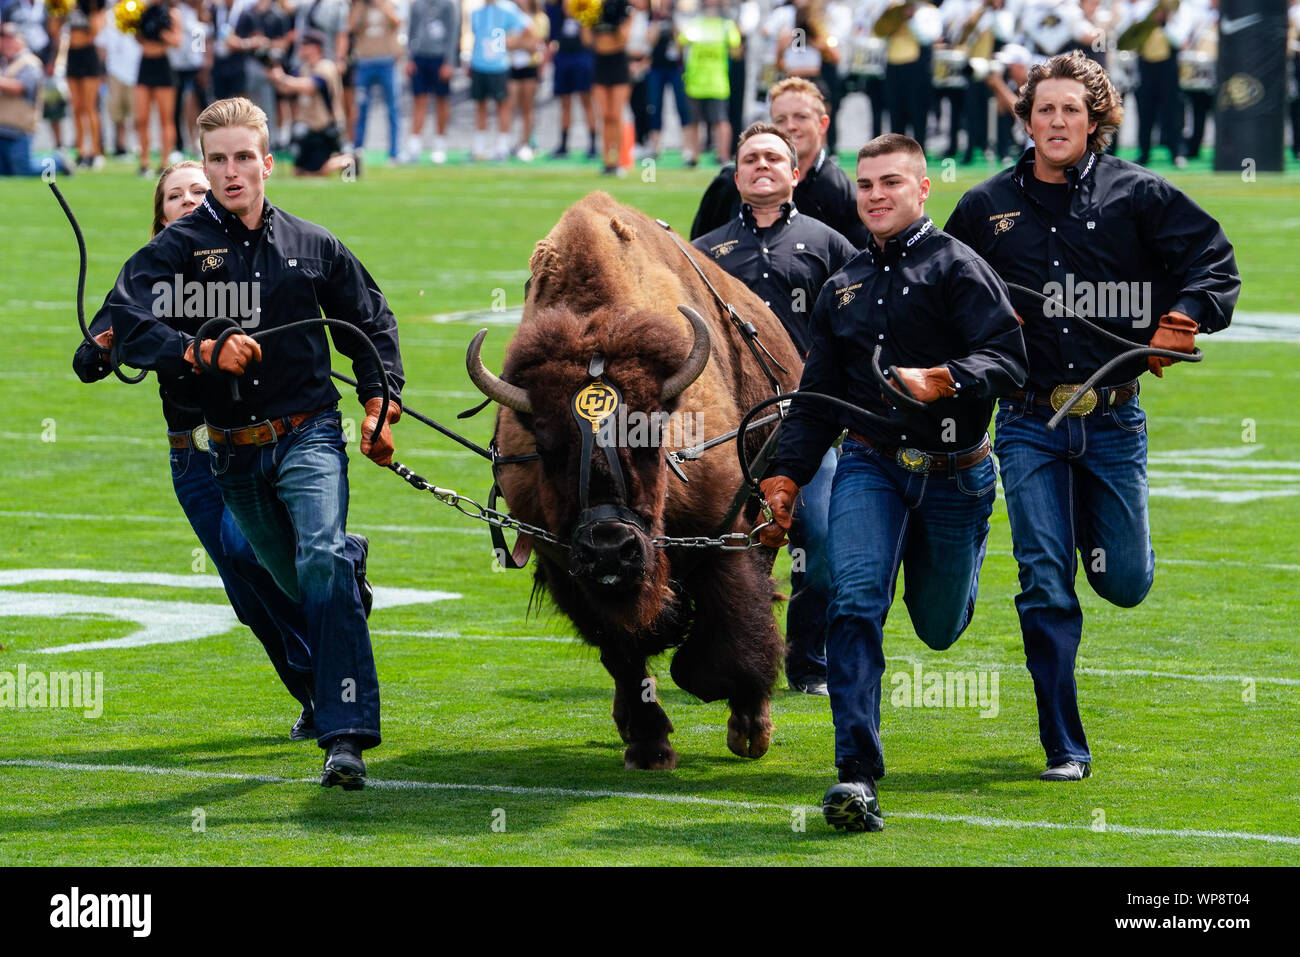 Ot. 7th Sep, 2019. Colorado mascot Ralph the Buffalo runs on the field prior to the game against Nebraska at Folsom Field in Boulder, CO. Colorado came from behind to defeat Nebraska 34-31 in OT. Derek Regensburger/CSM/Alamy Live News Stock Photo